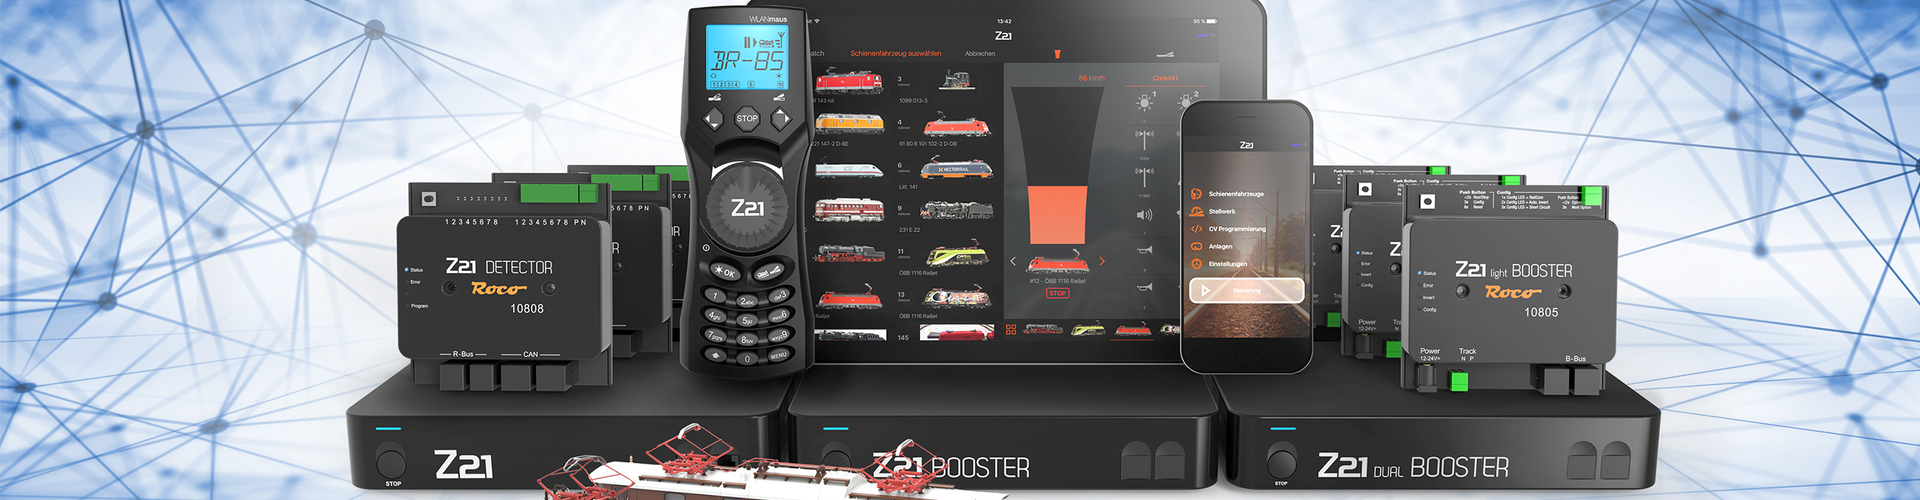 z21 system fuer website small